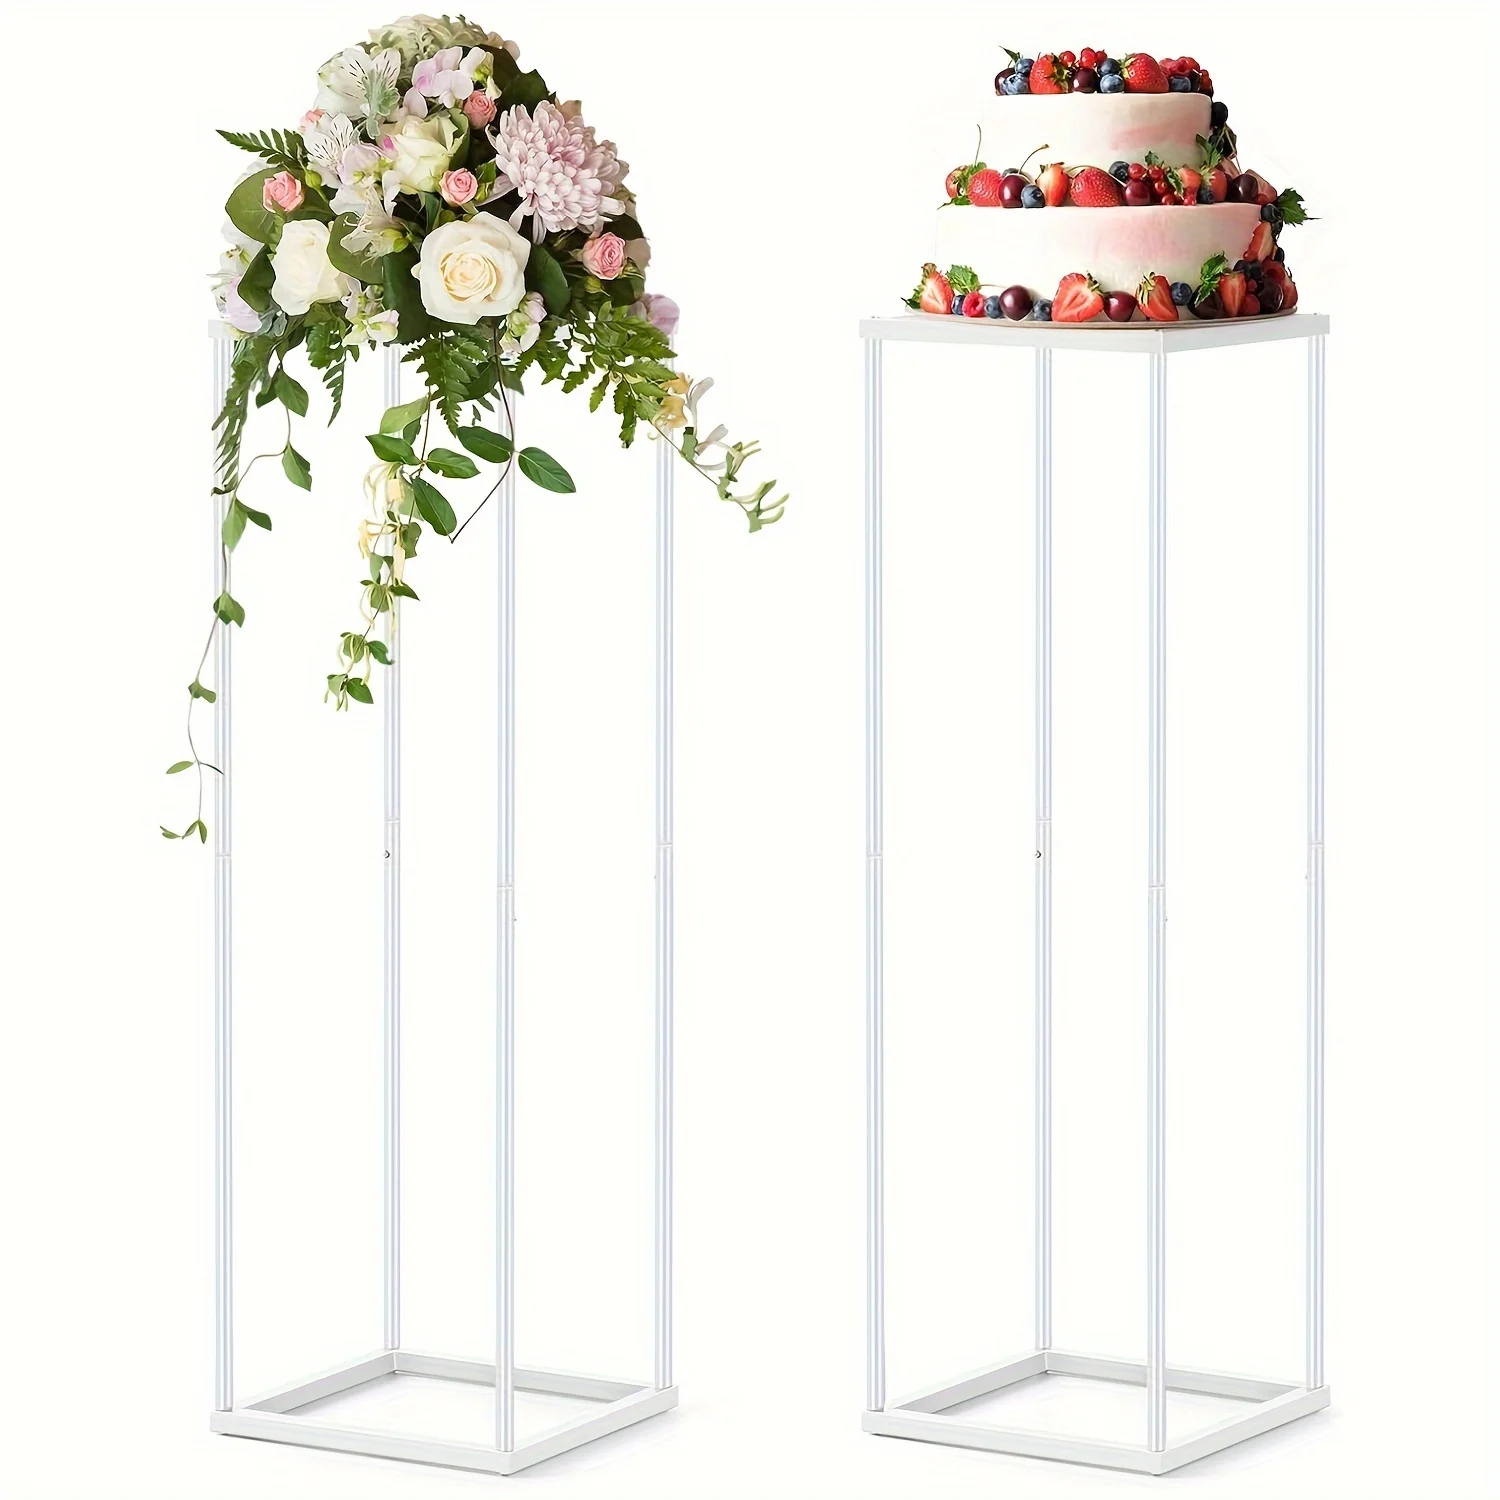 

2pcs, Wedding Centerpieces For Tables With Mesh Plates, Metal Flower Vases For Centerpieces, 31.5in Column Geometric Pedestal St